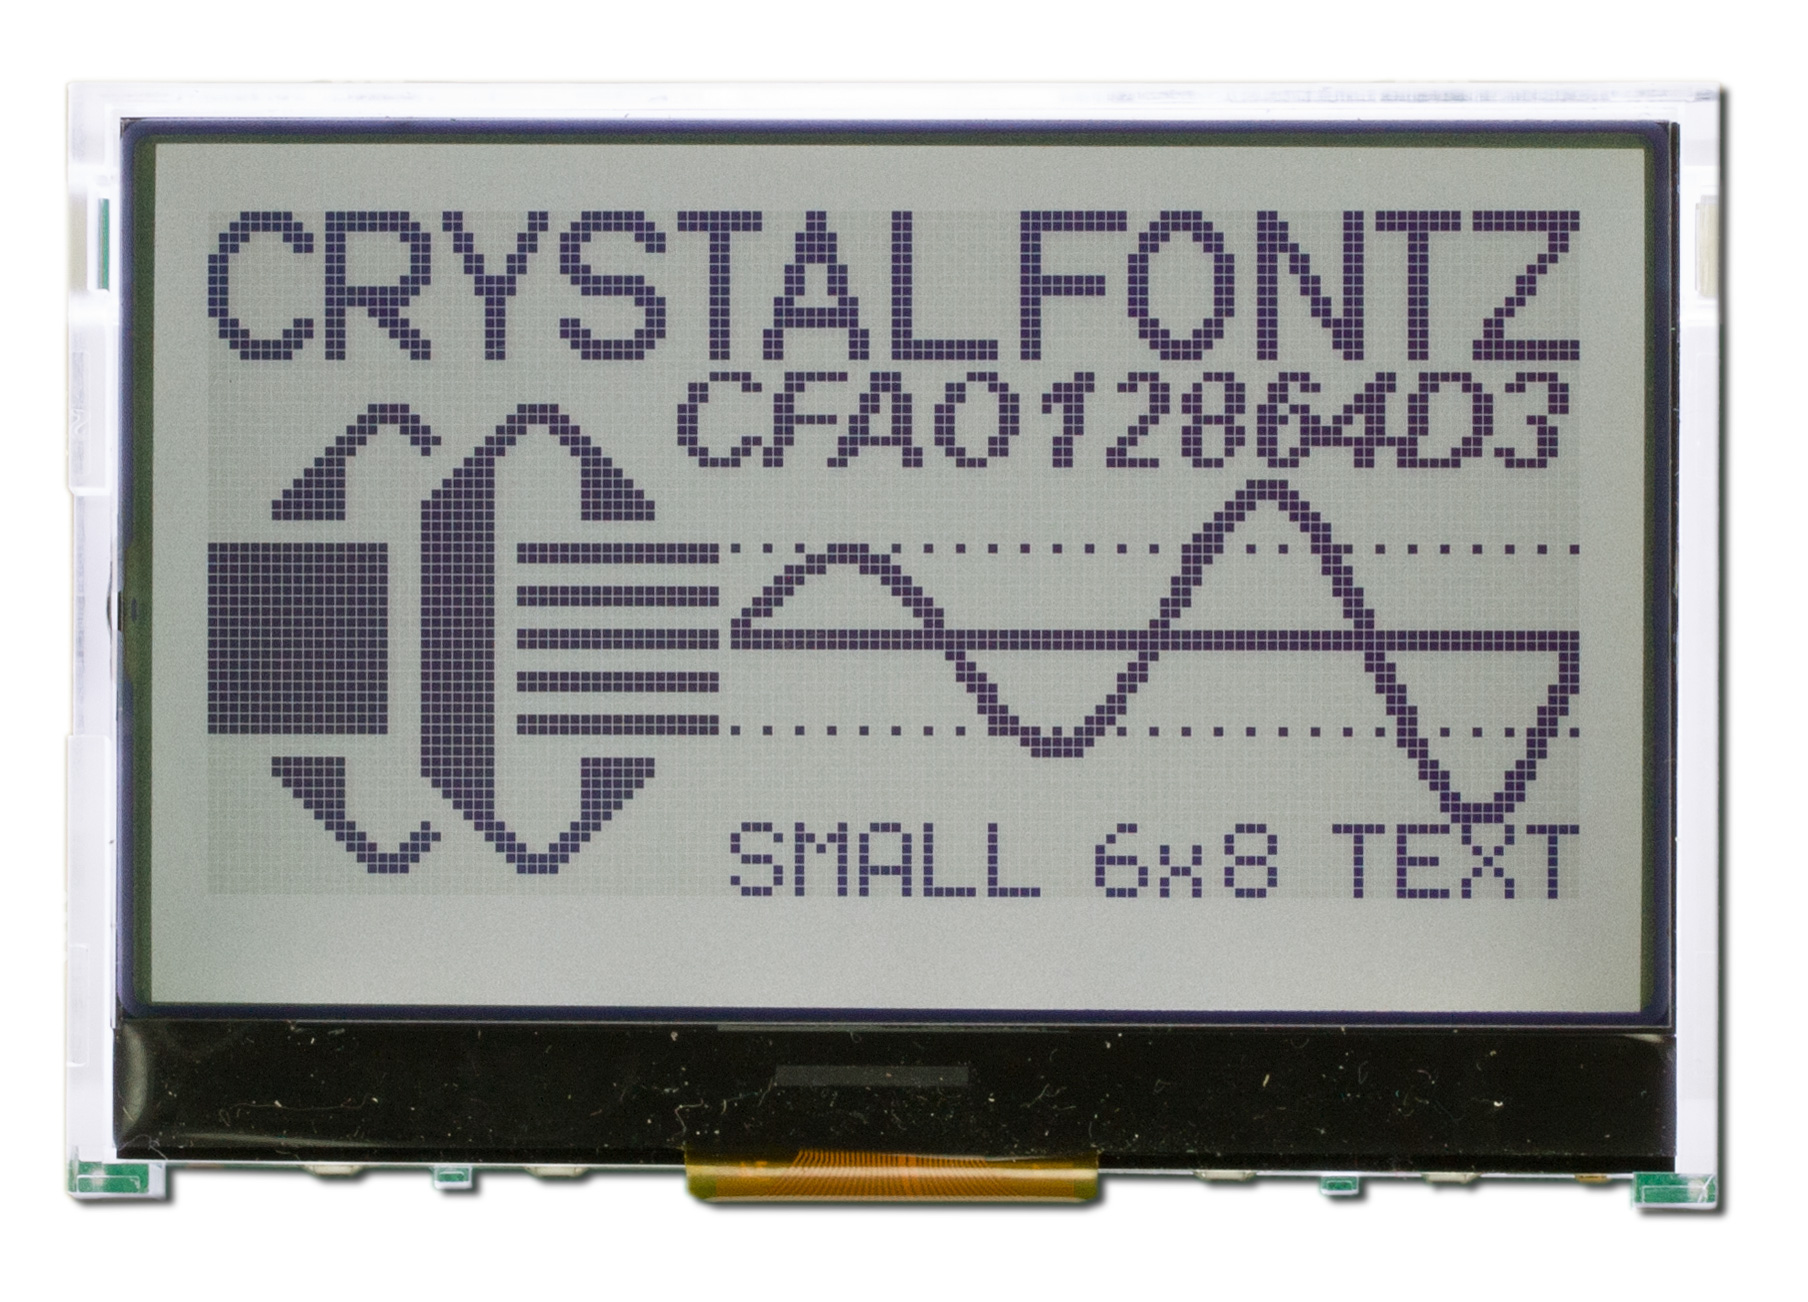 128x64 Graphical LCD Module from Crystalfontz